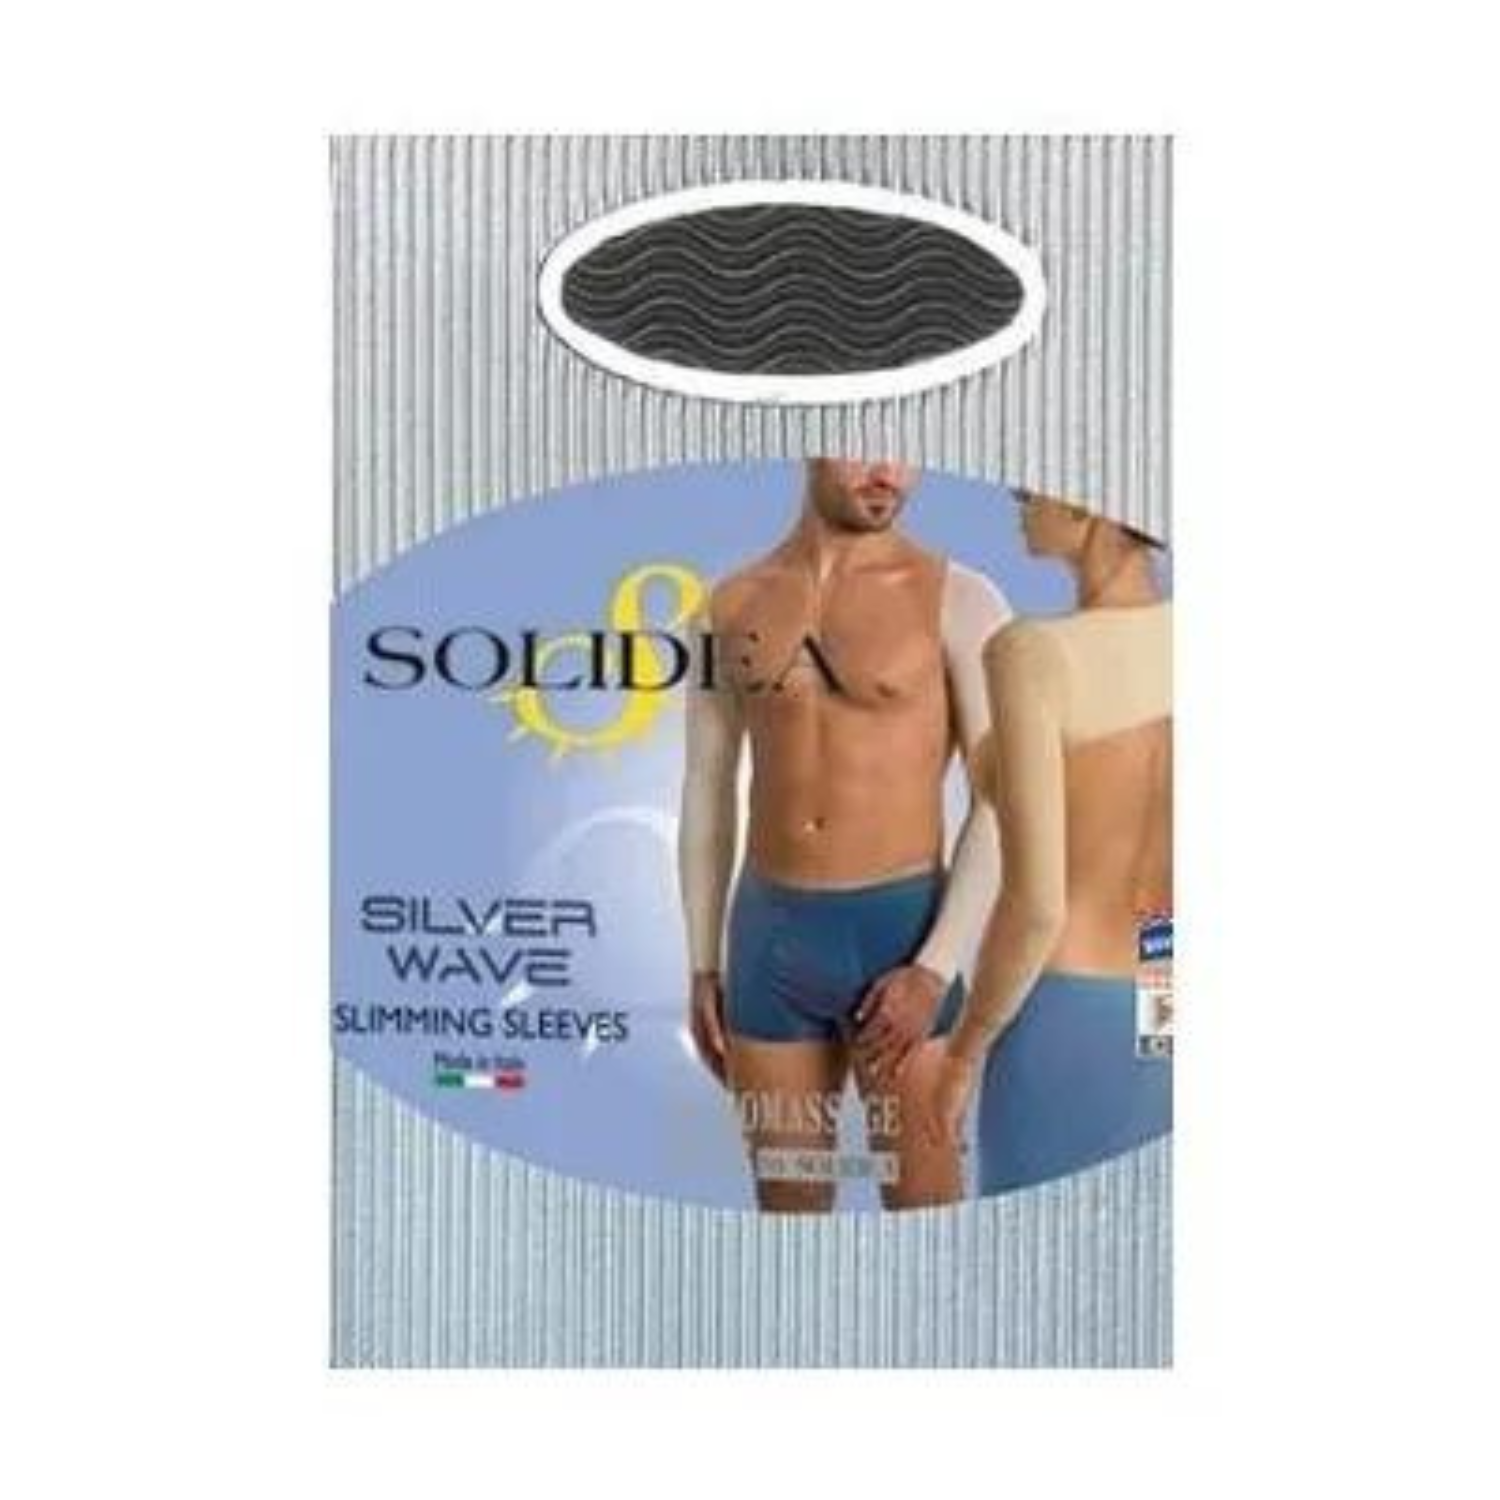 Solidea Silver Wave Slimming Sleeves Hihat 3L Noisette